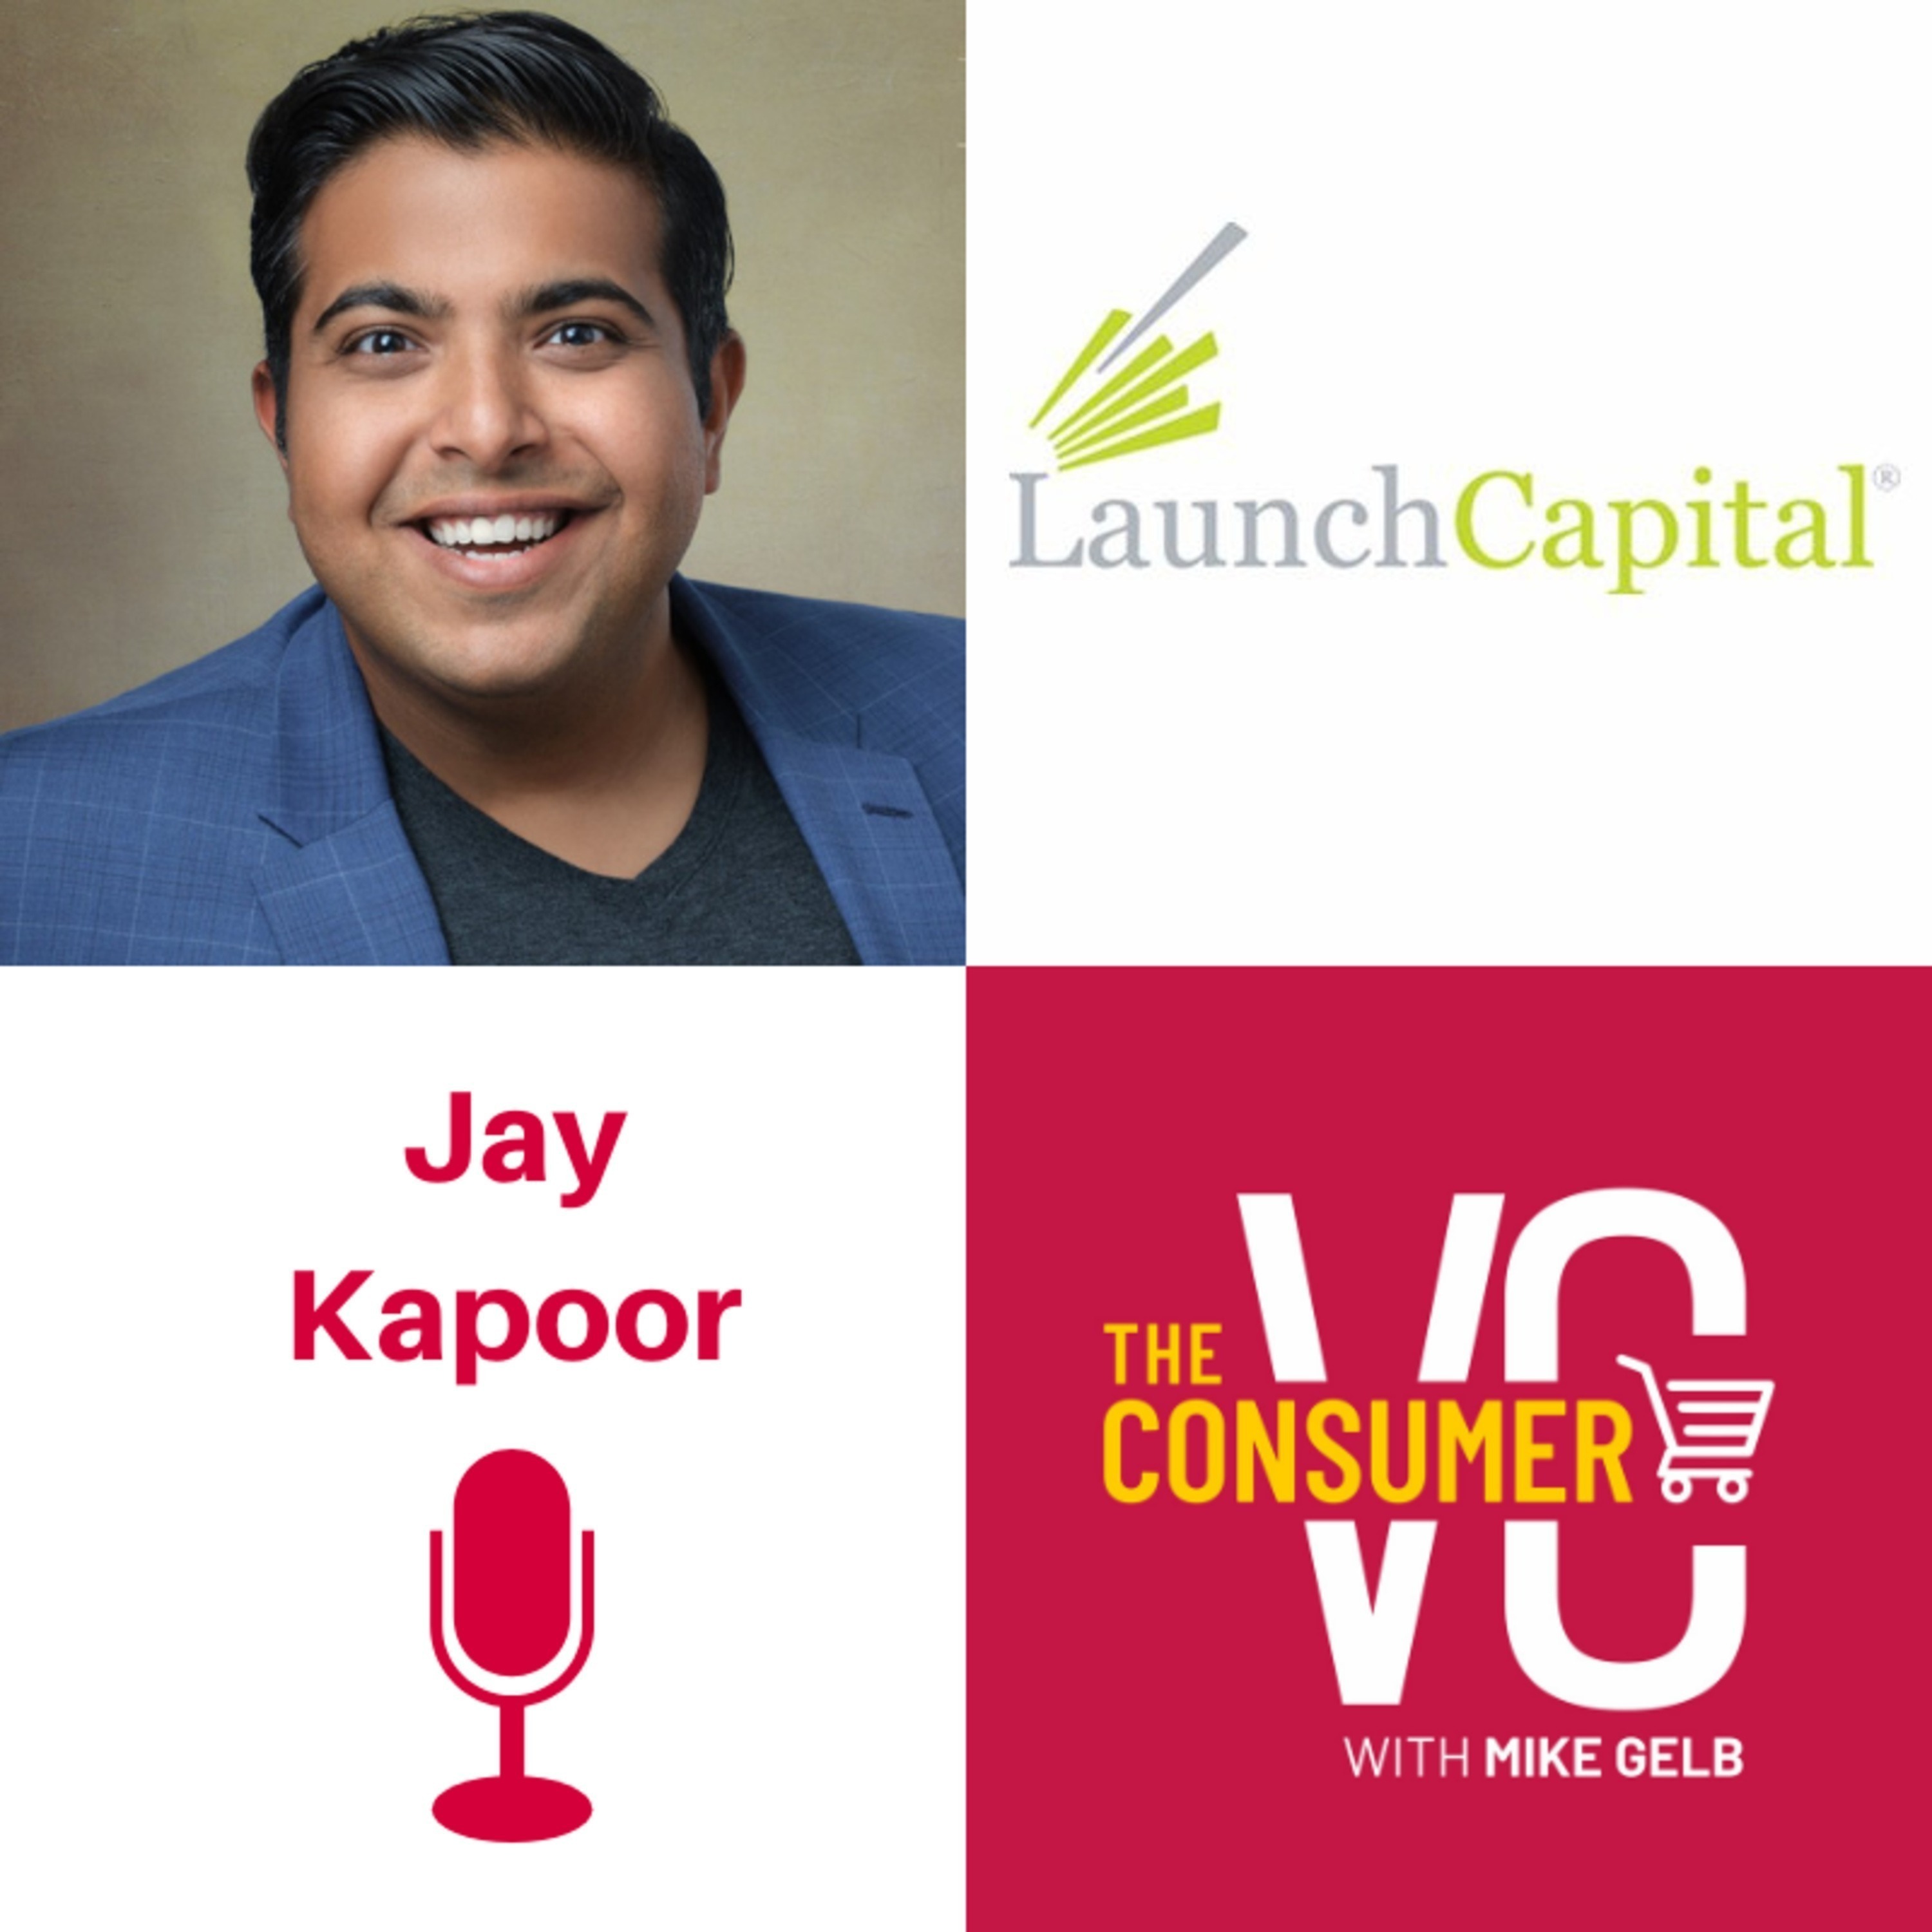 Jay Kapoor (Launch Capital) - Persistence, Building Trust & Finding Founder-Market Fit